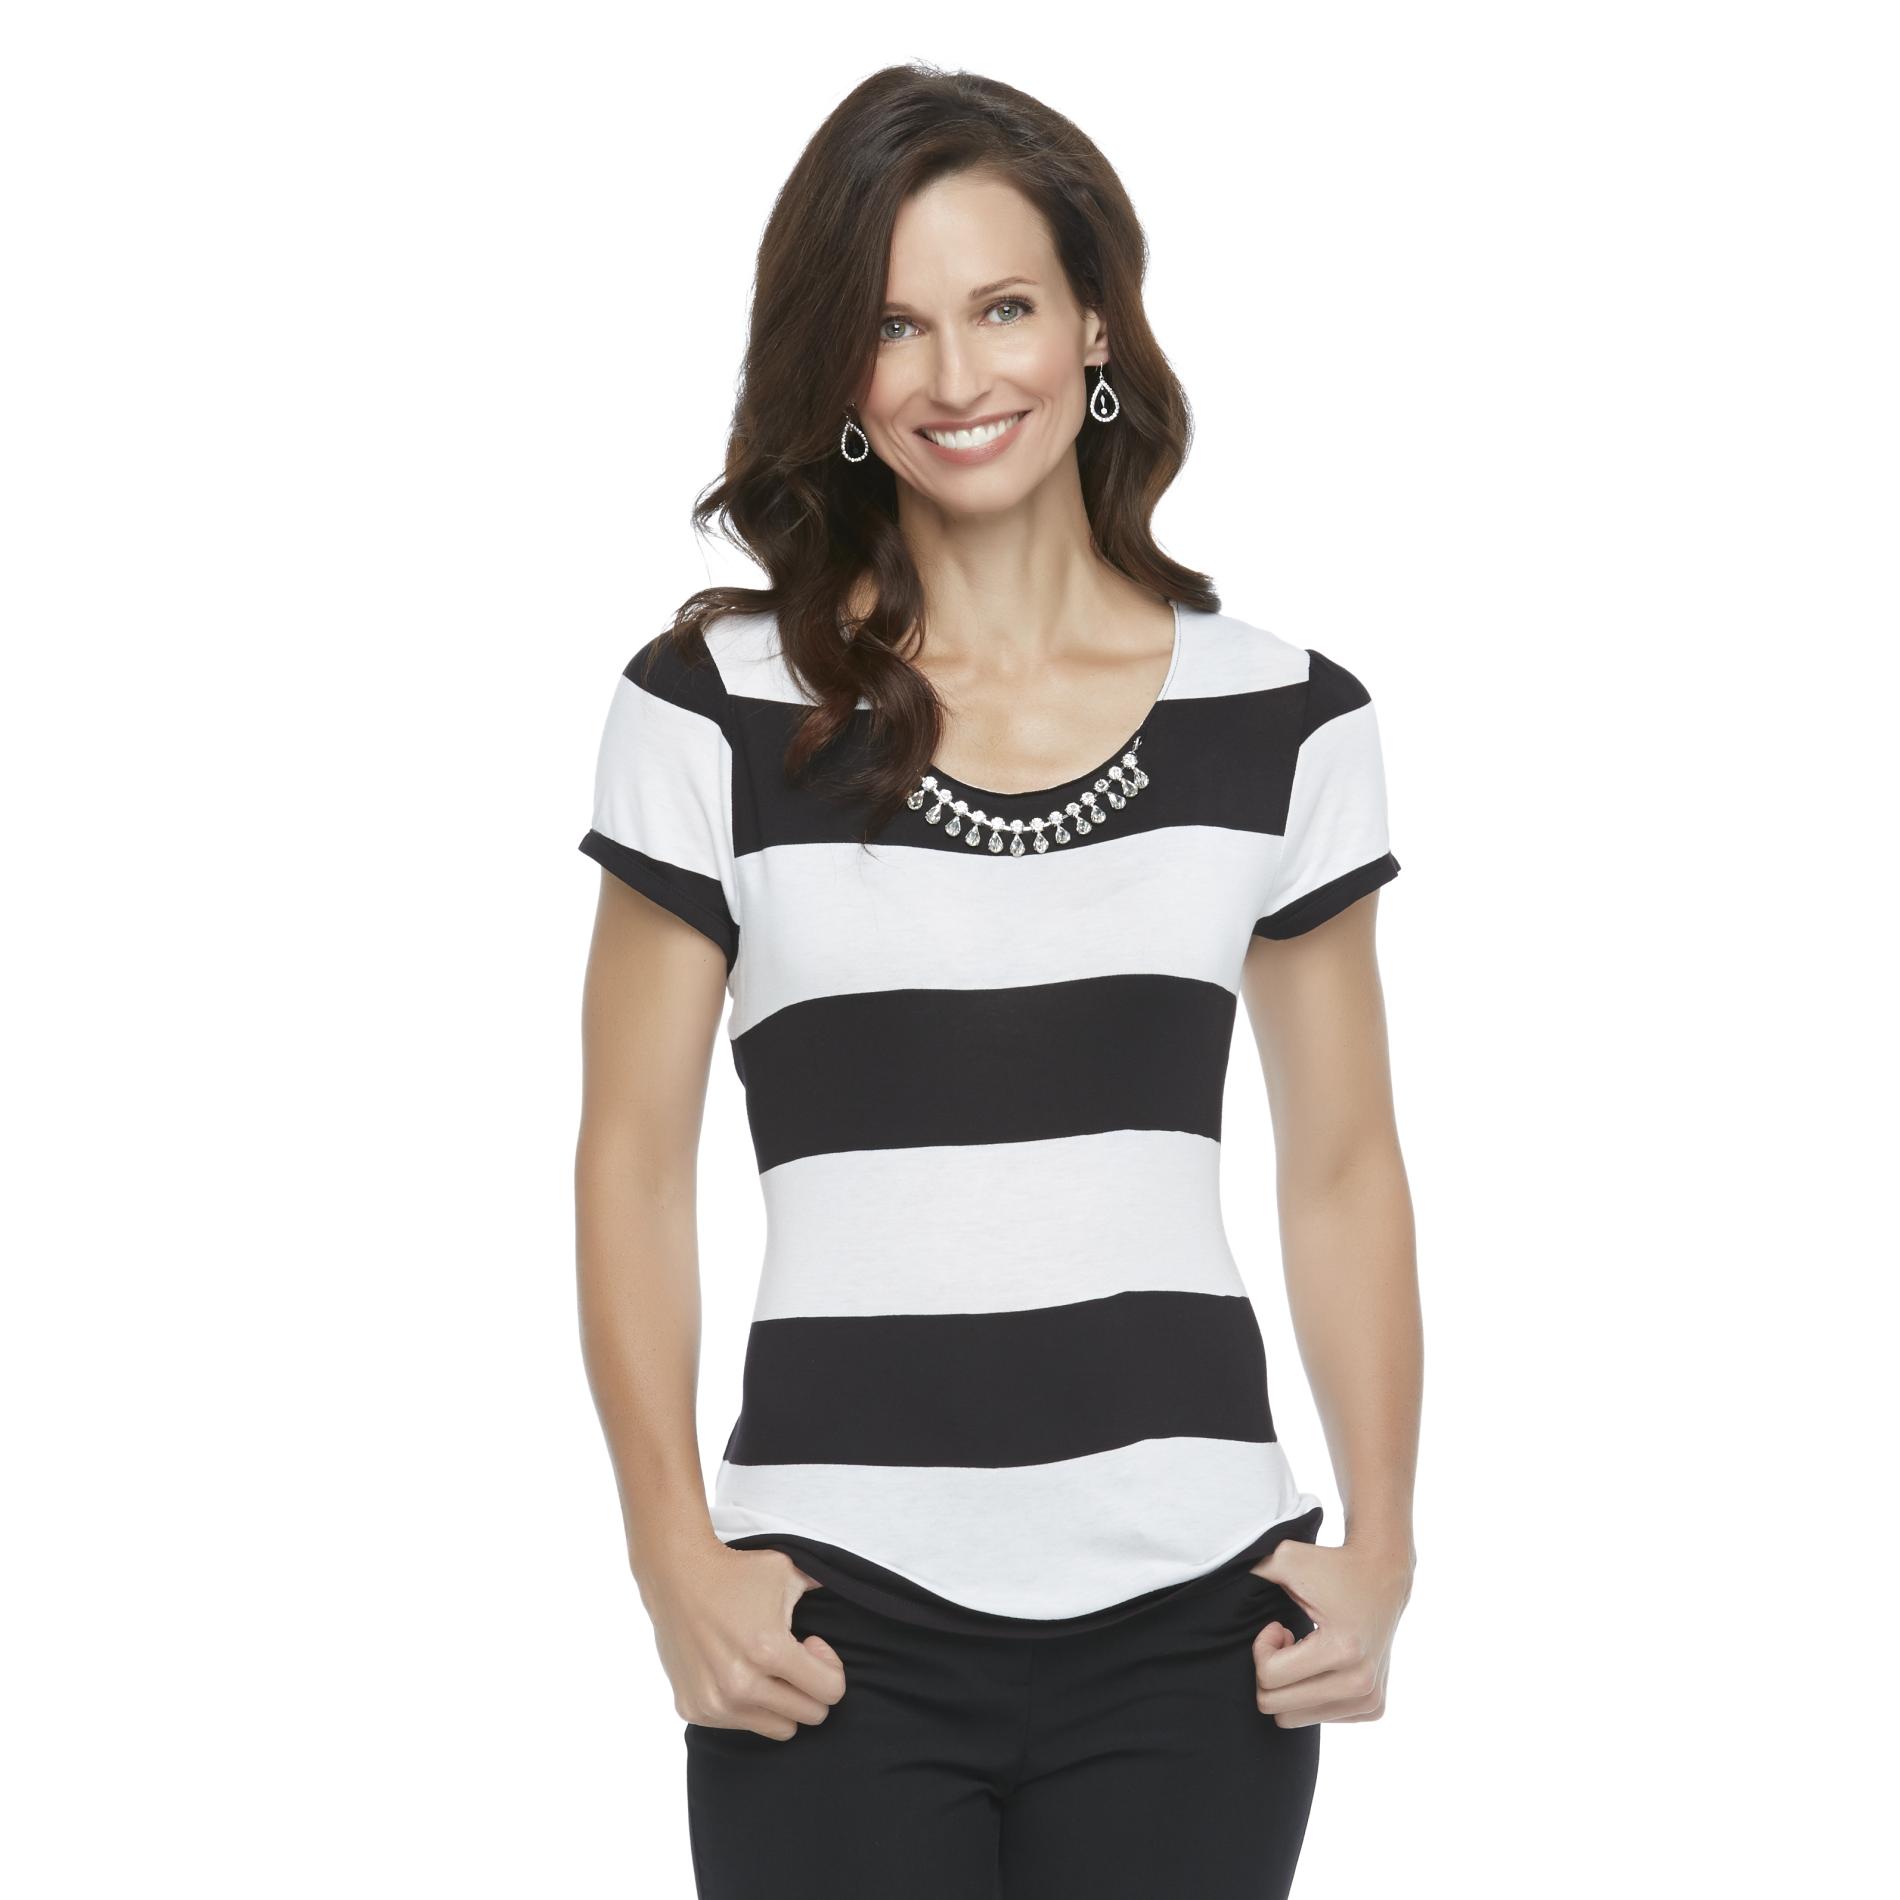 Jaclyn Smith Women's Short-Sleeve Necklace Top - Striped